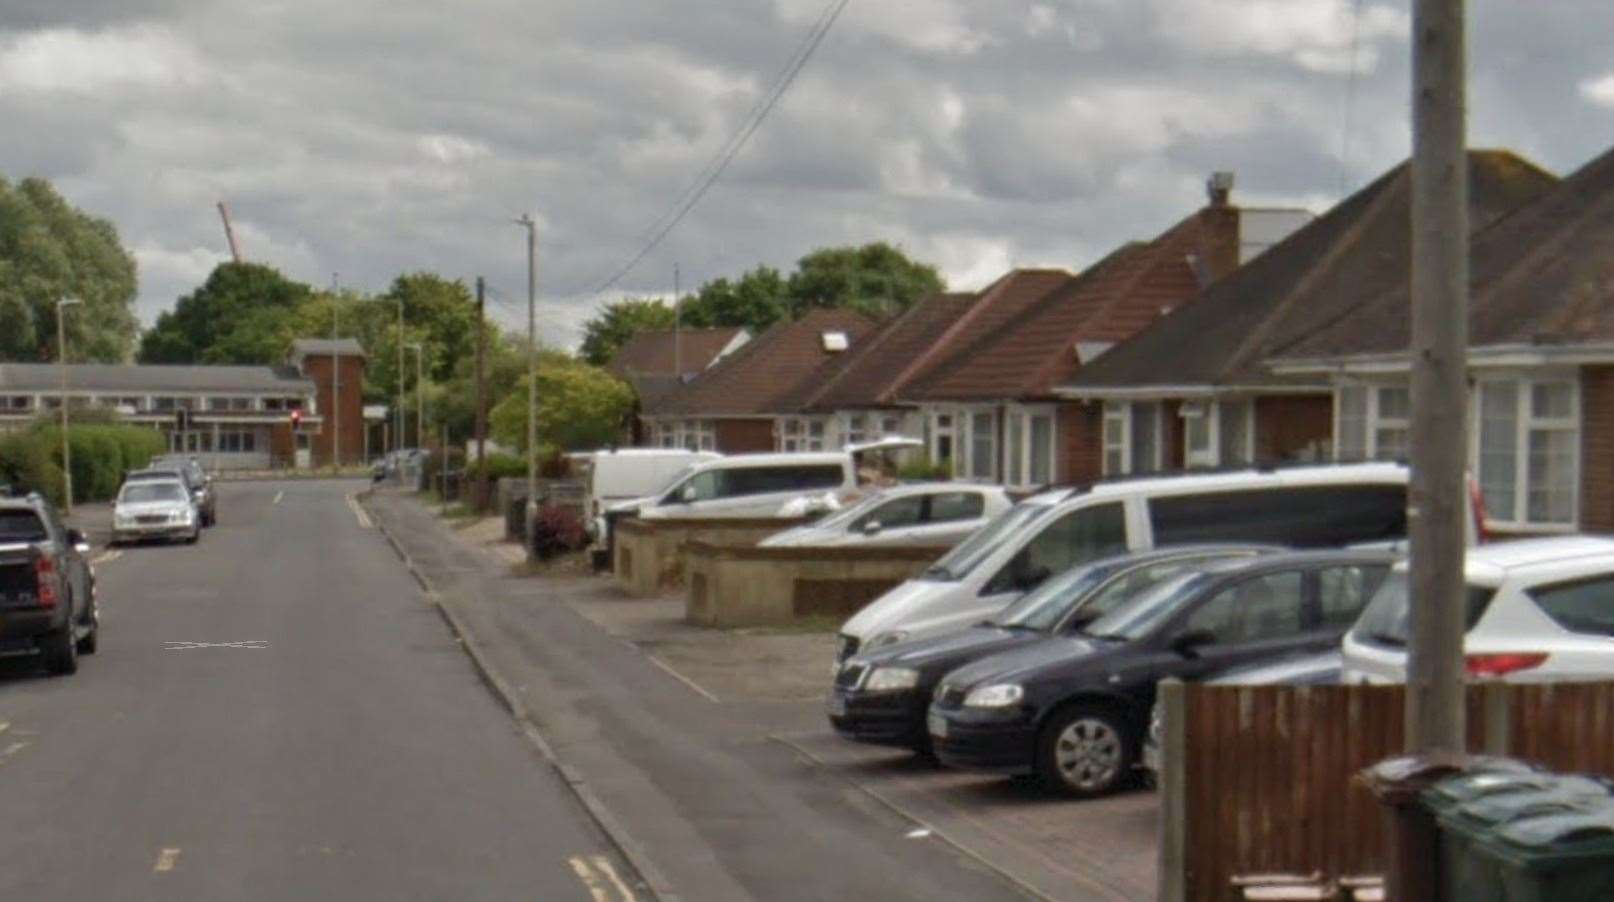 The incident happened on Elm Place, Ashford. Picture: Google